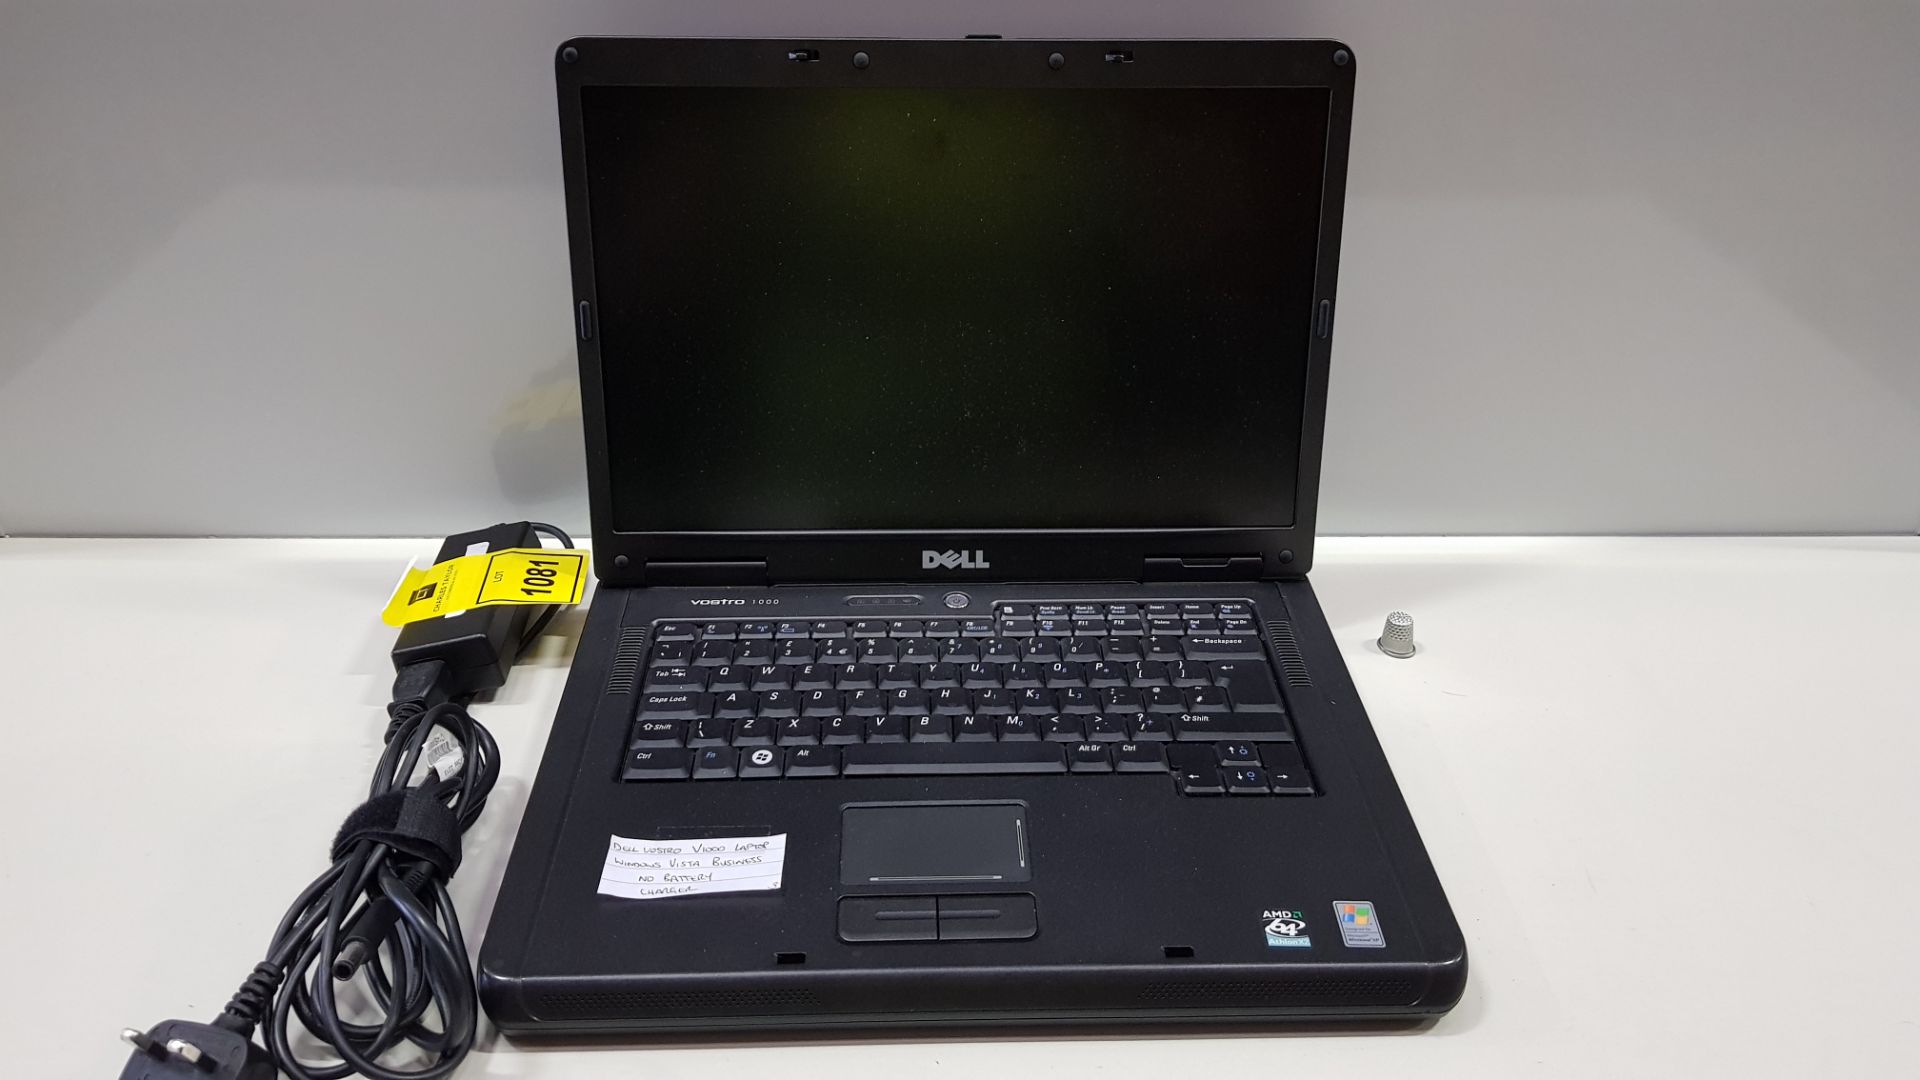 DELL VOSTRO V1000 LAPTOP WINDOWS VISTA BUSINESS NO BATTERY - WITH CHARGER